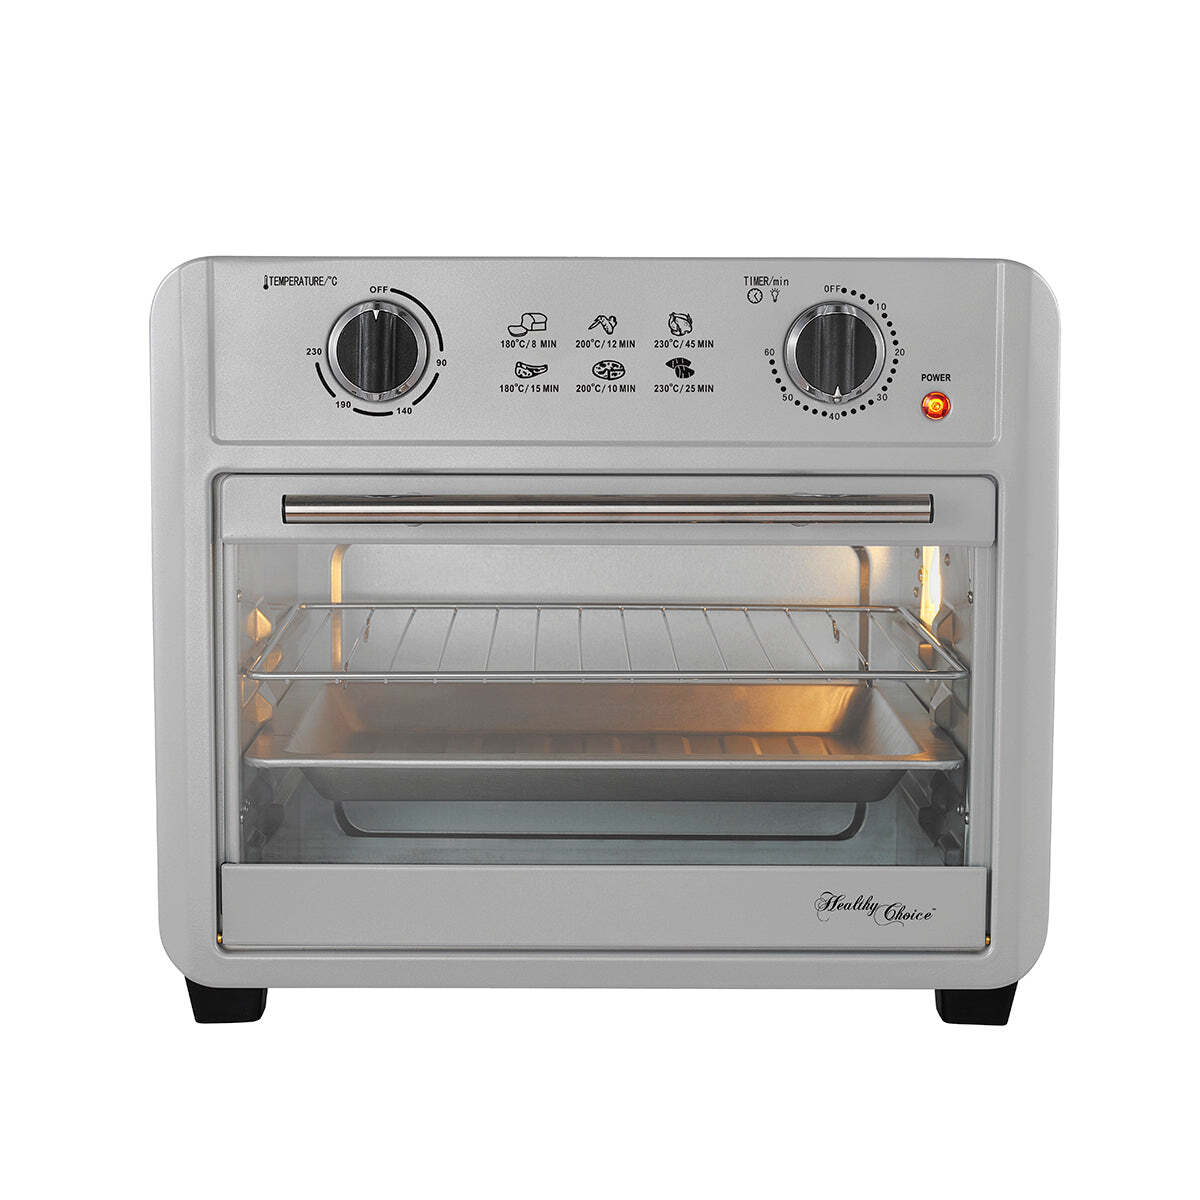 23L Air Fryer Oven + 3 Accessories